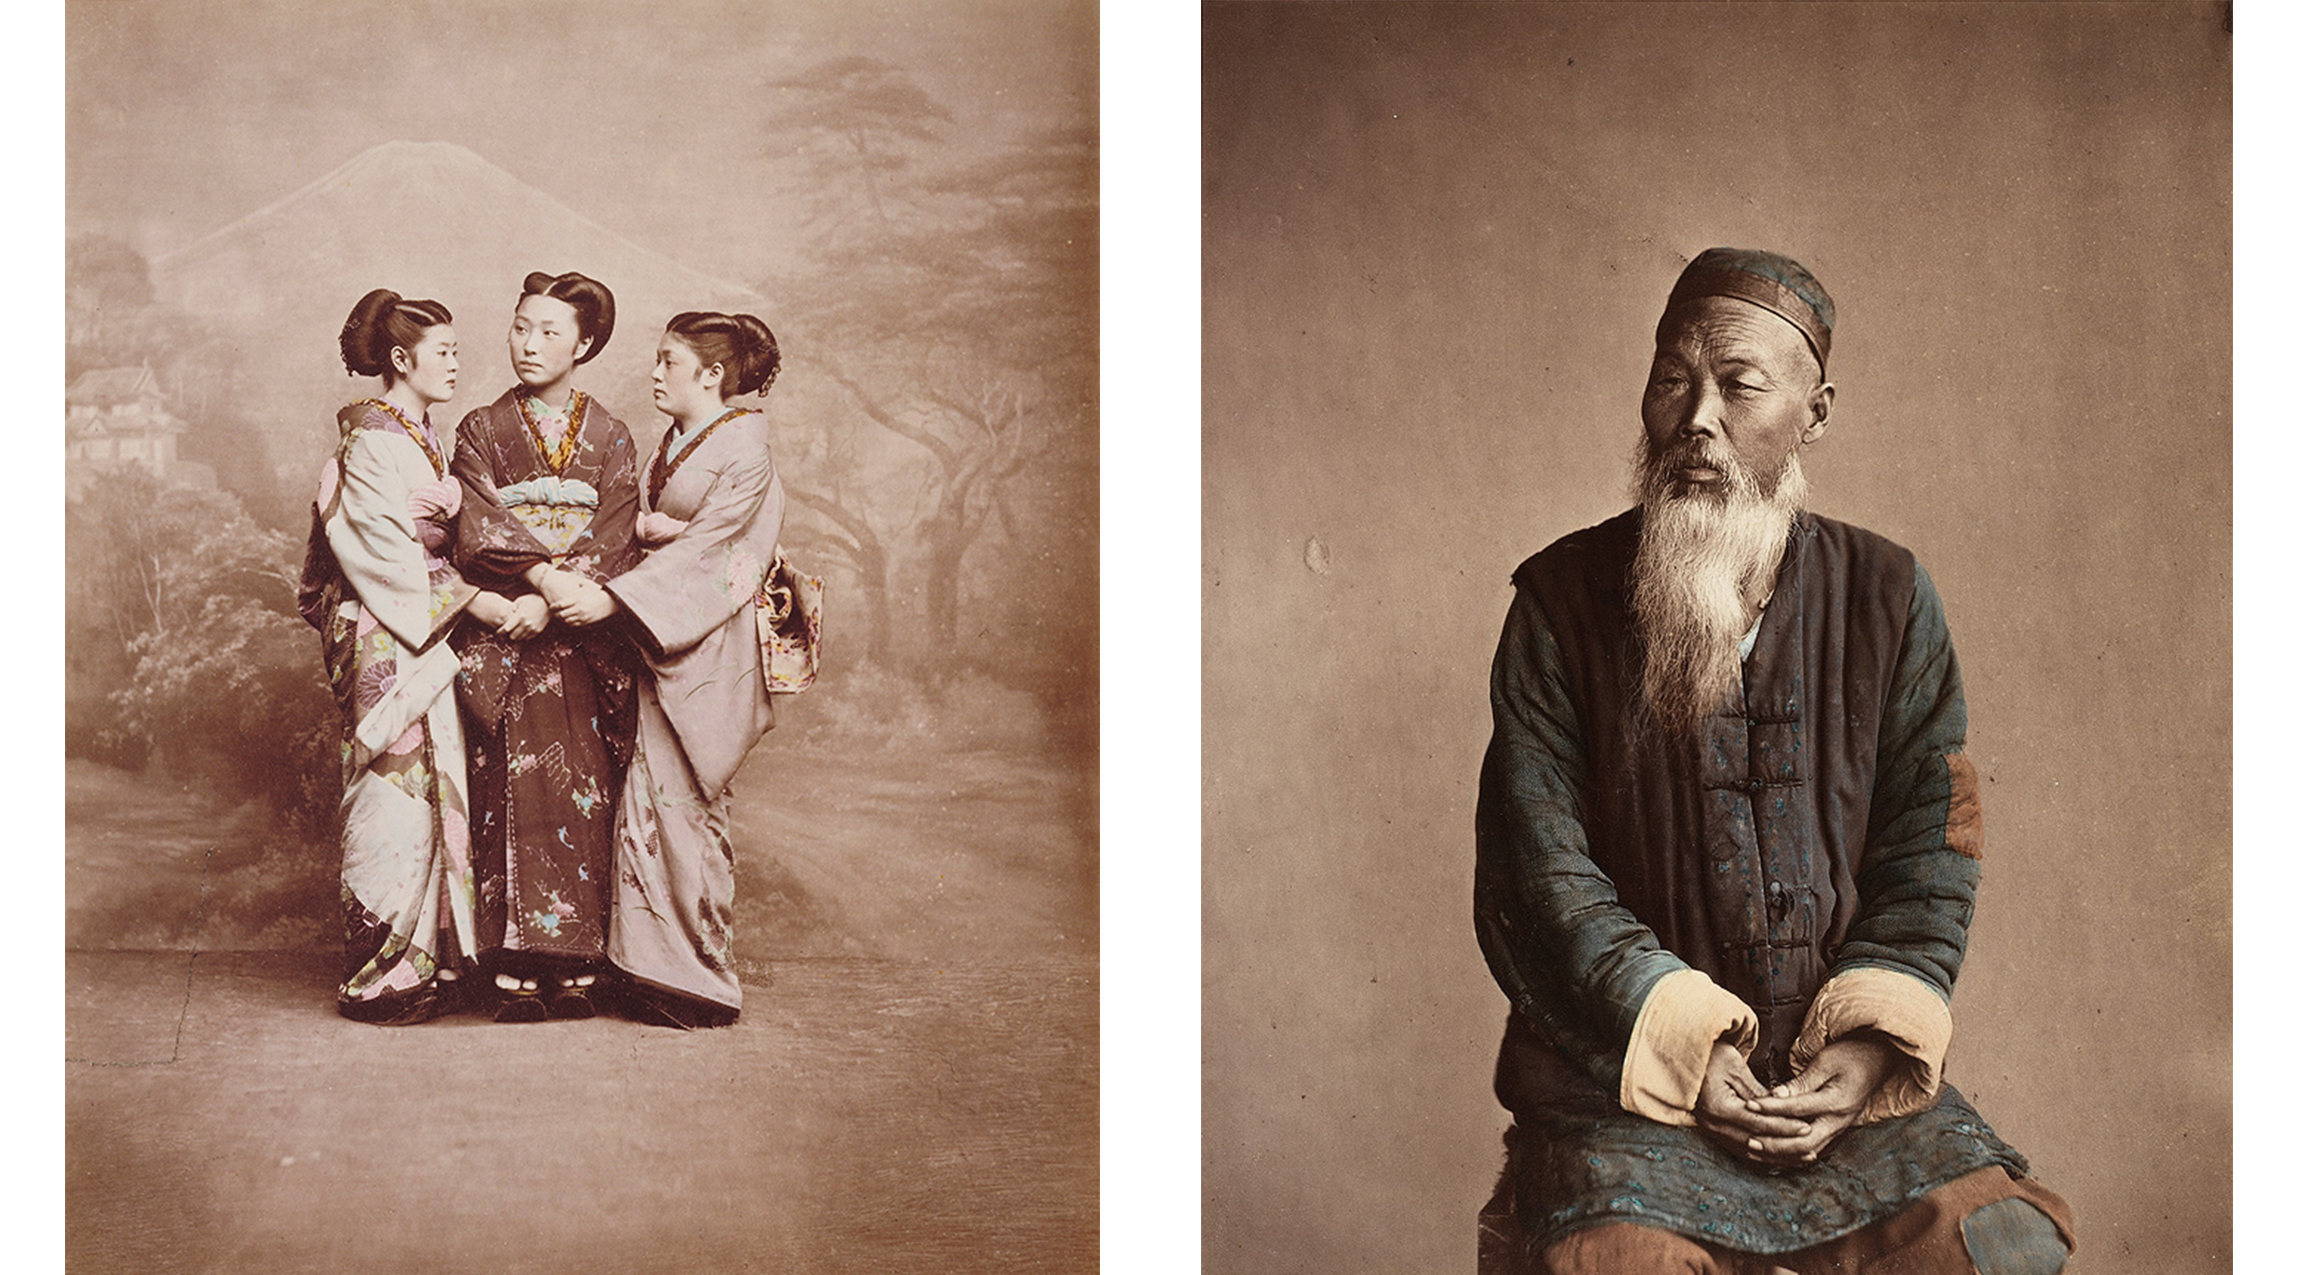 left: three women wearing kimonos; painted background with trees and a mountain. right: portrait of a seated man with long white beard wearing hat